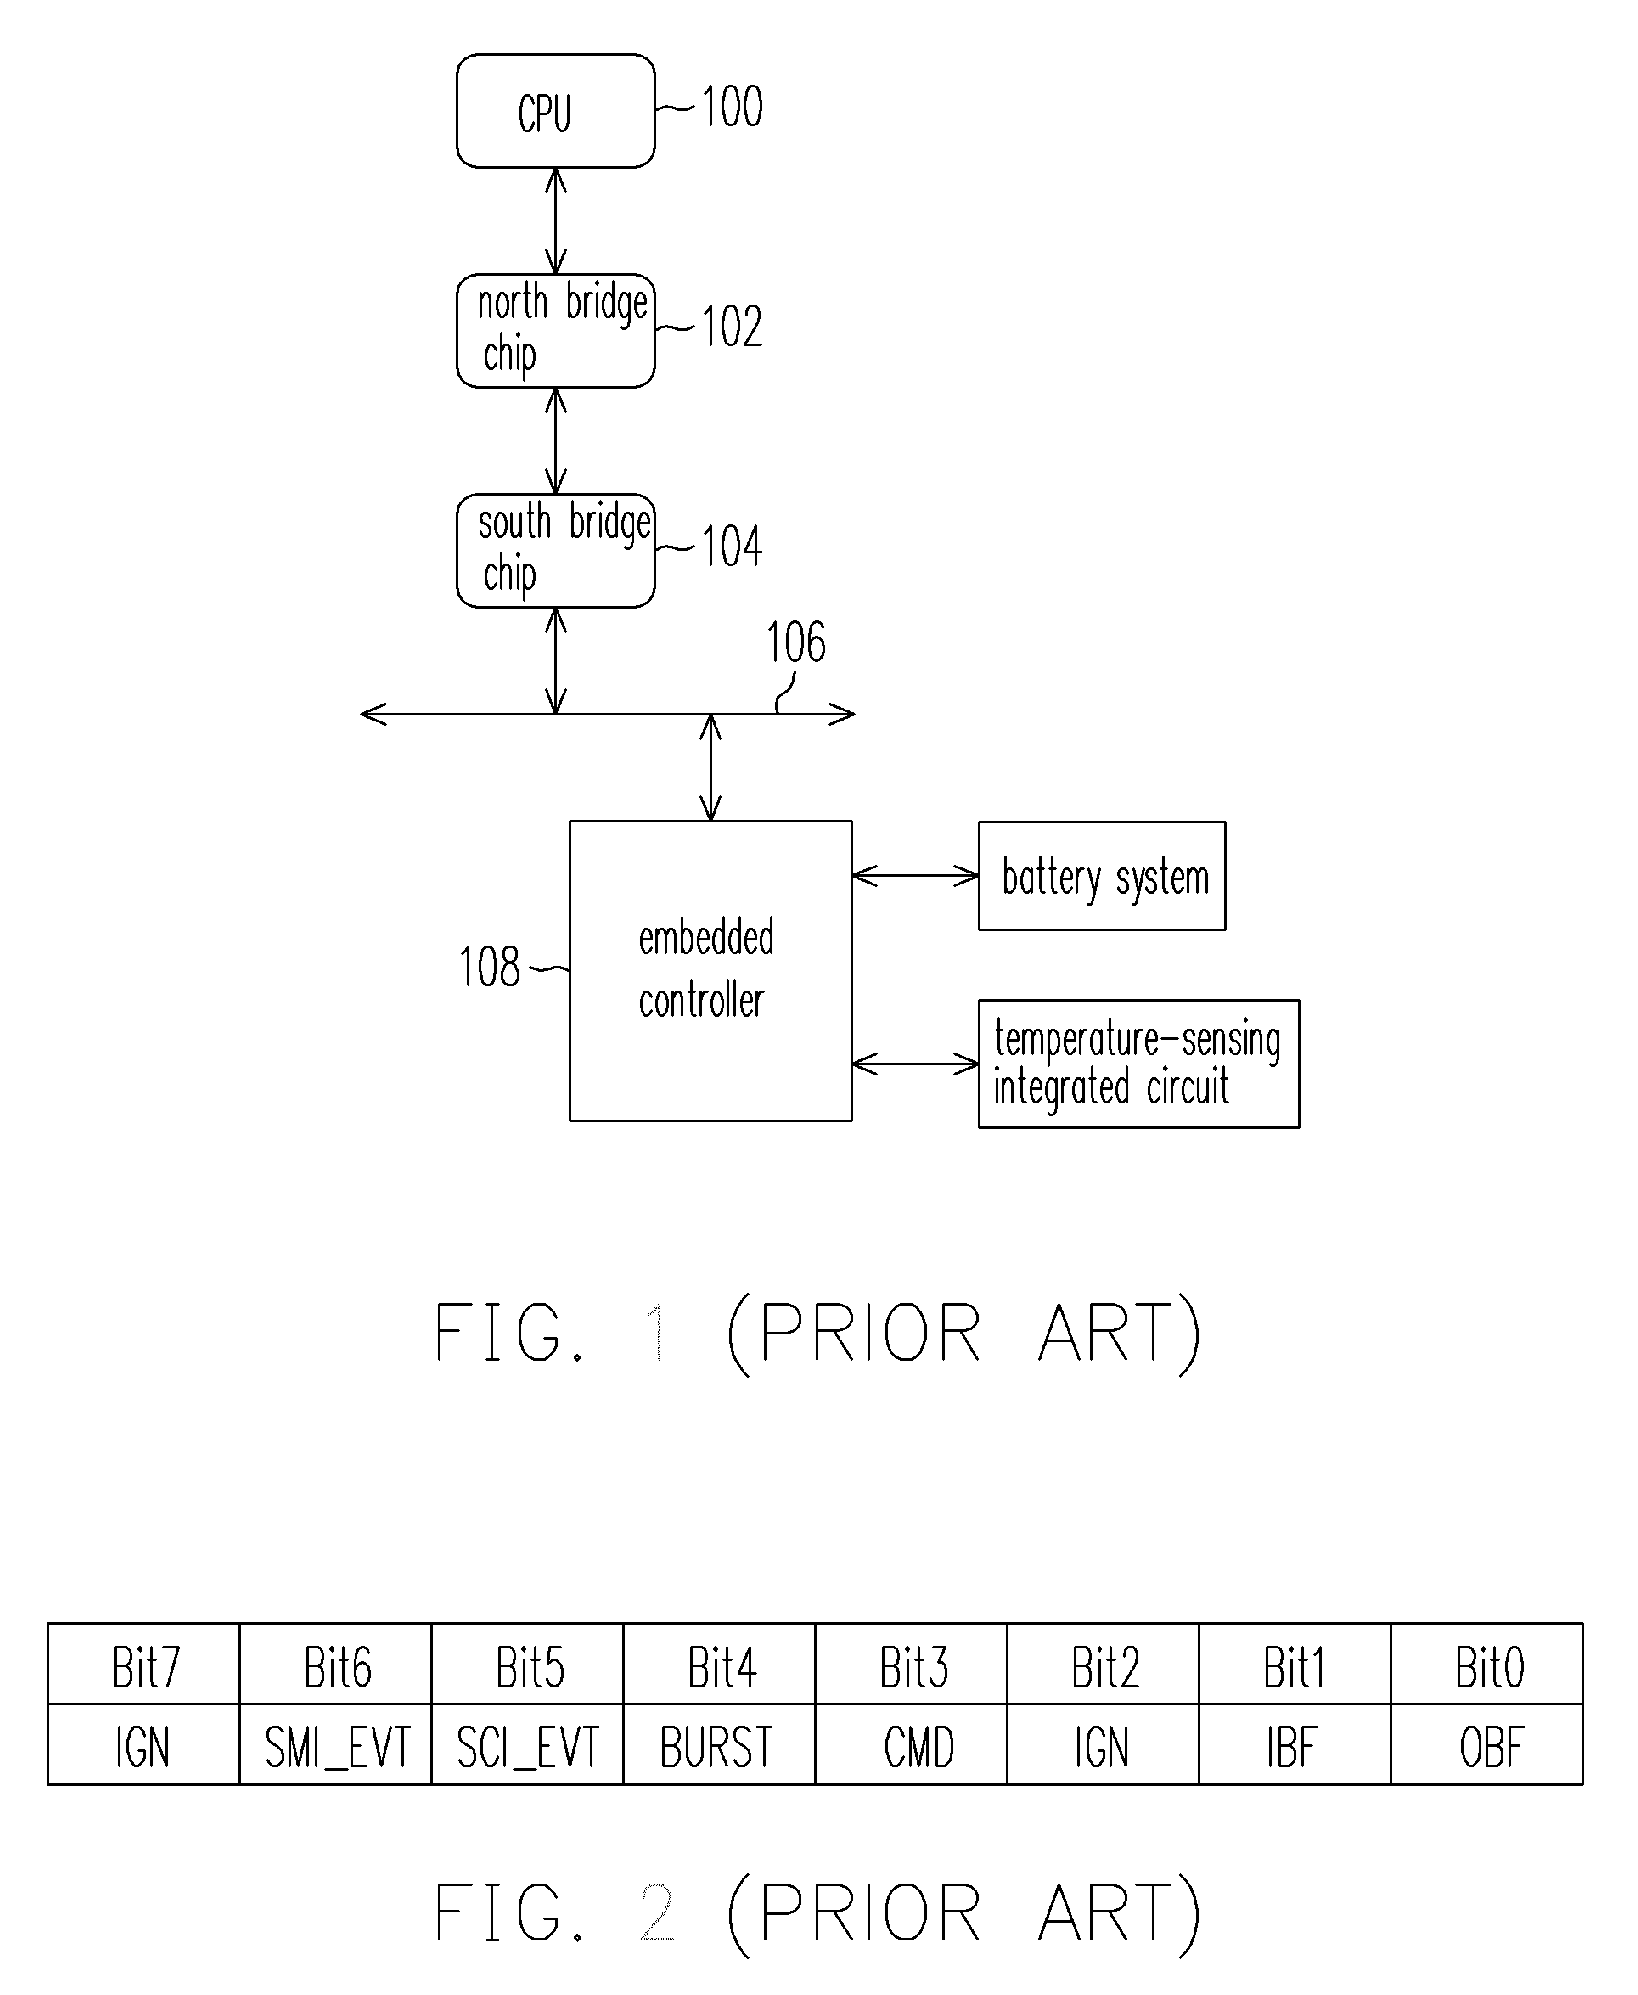 Method of communicating with embedded controller